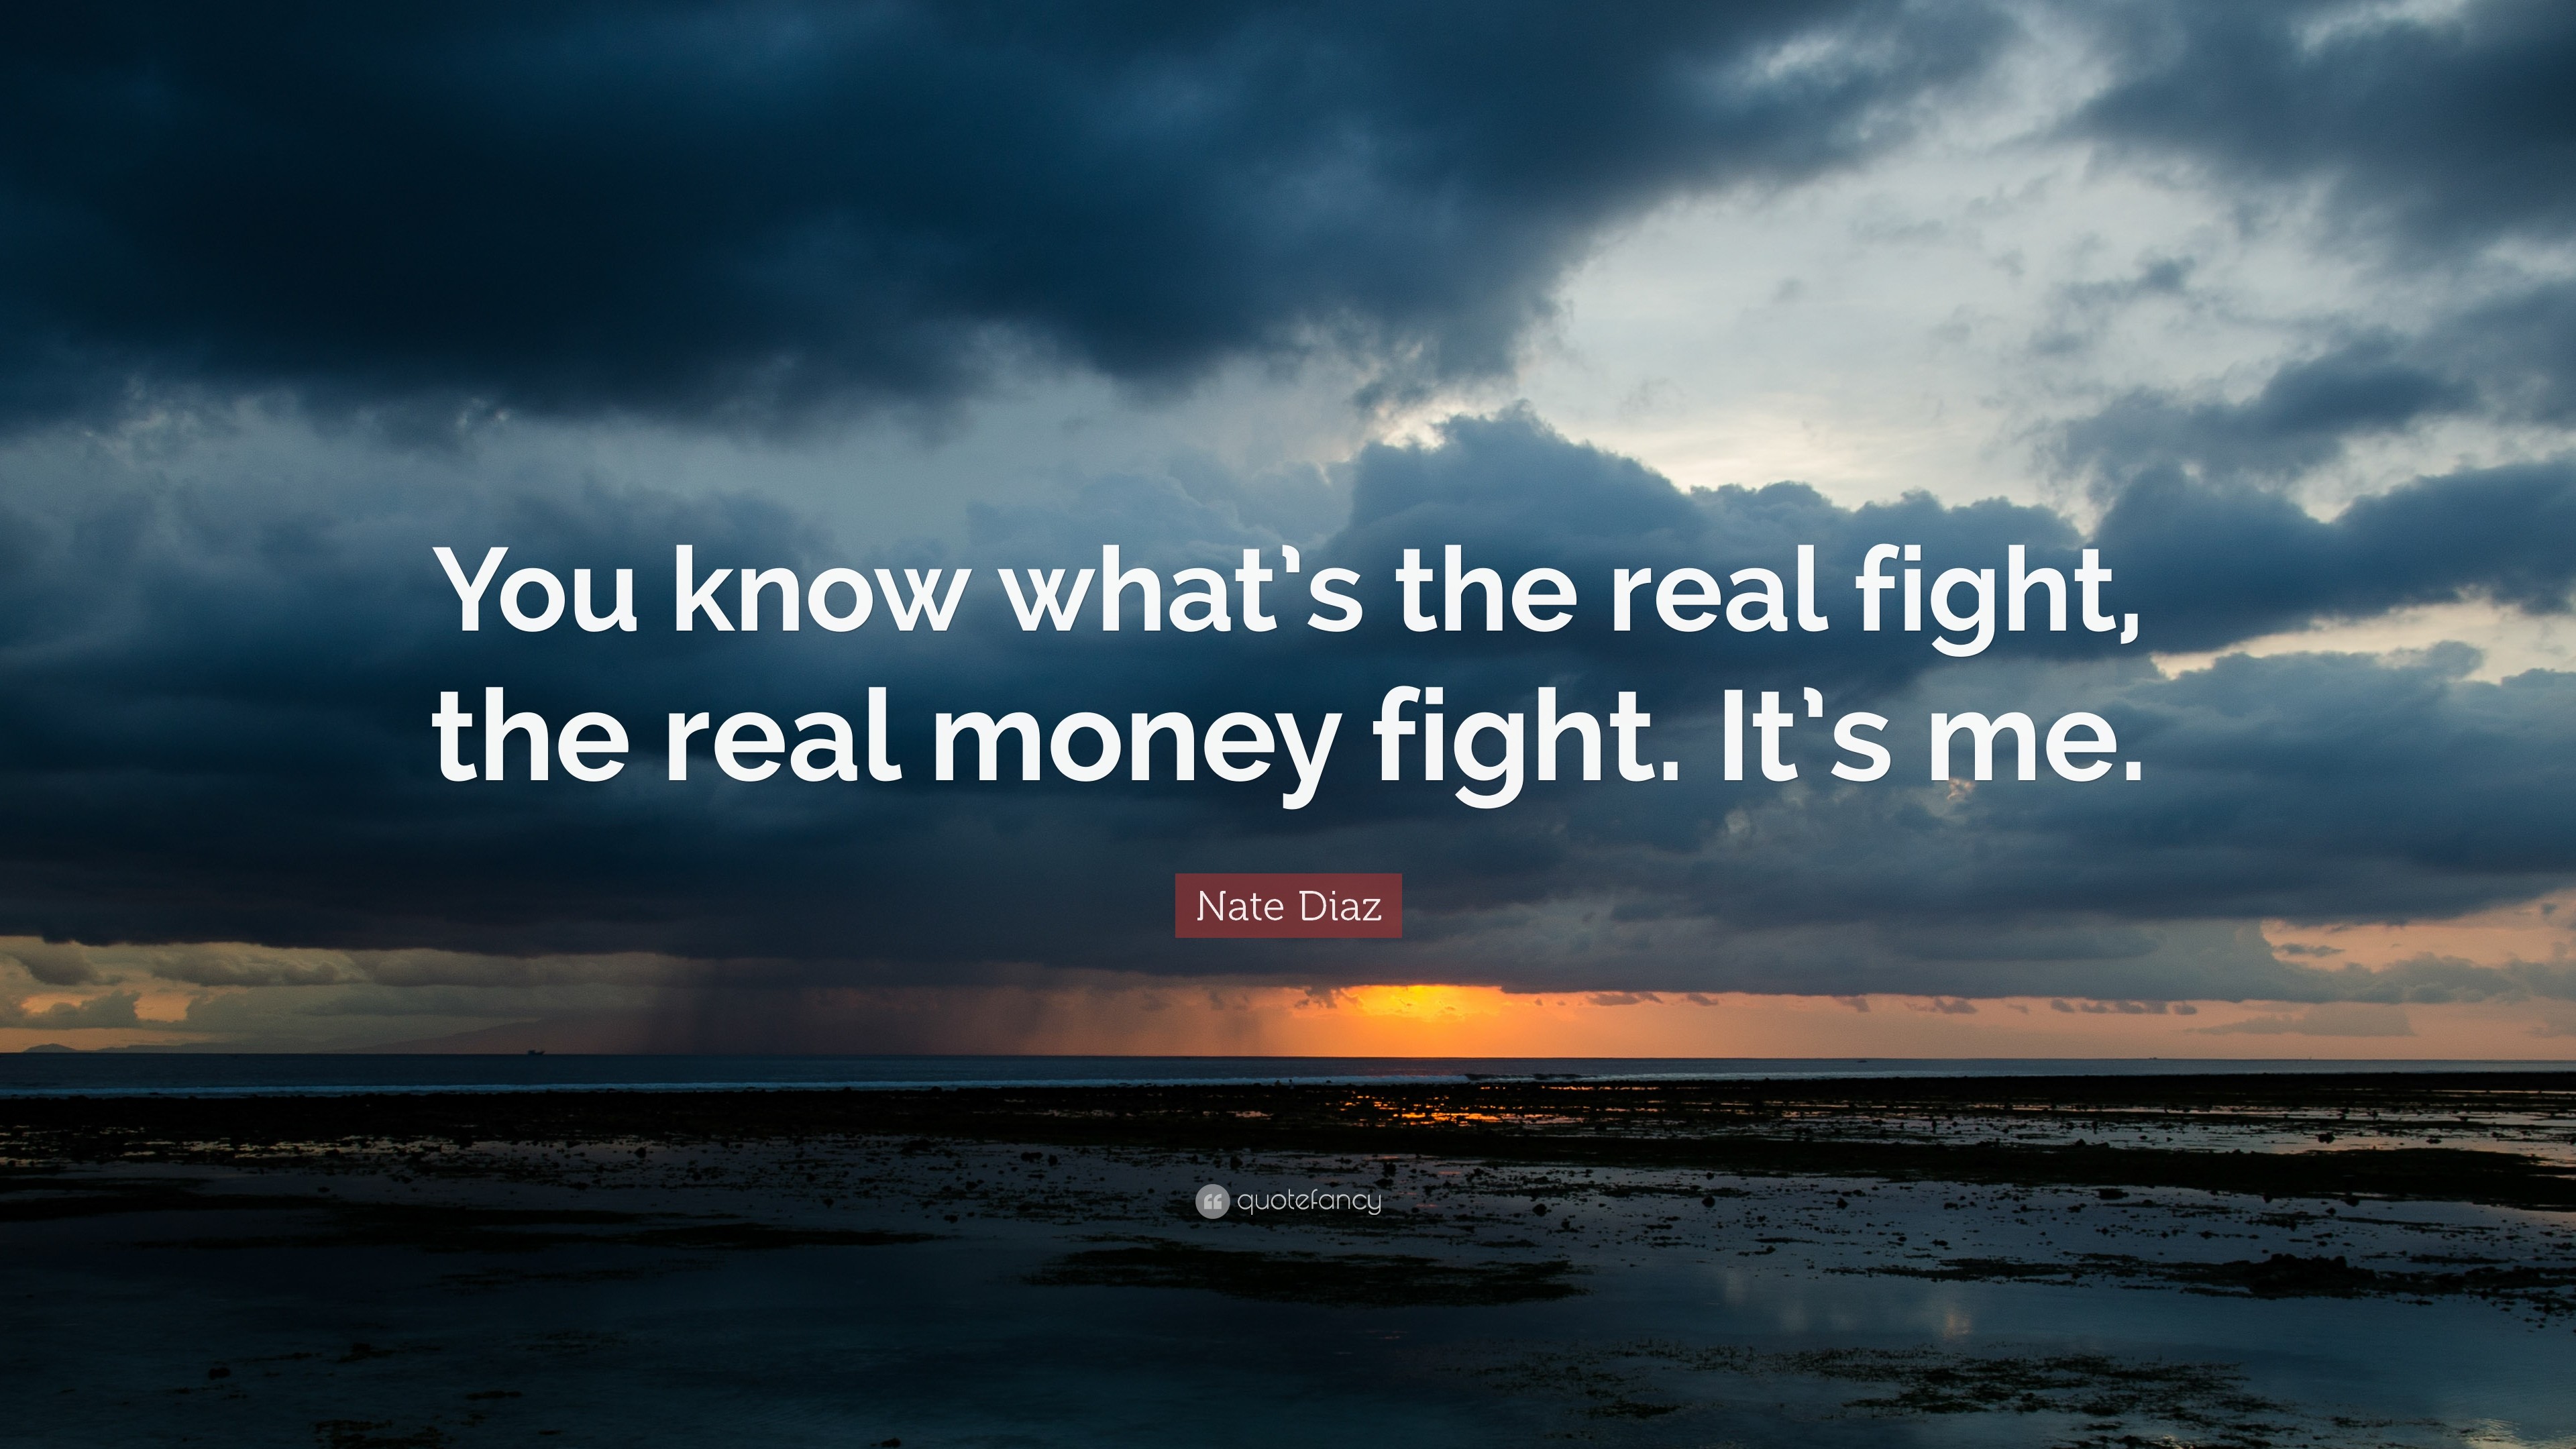 3840x2160 Nate Diaz Quote: “You know what's the real fight, the real money fight